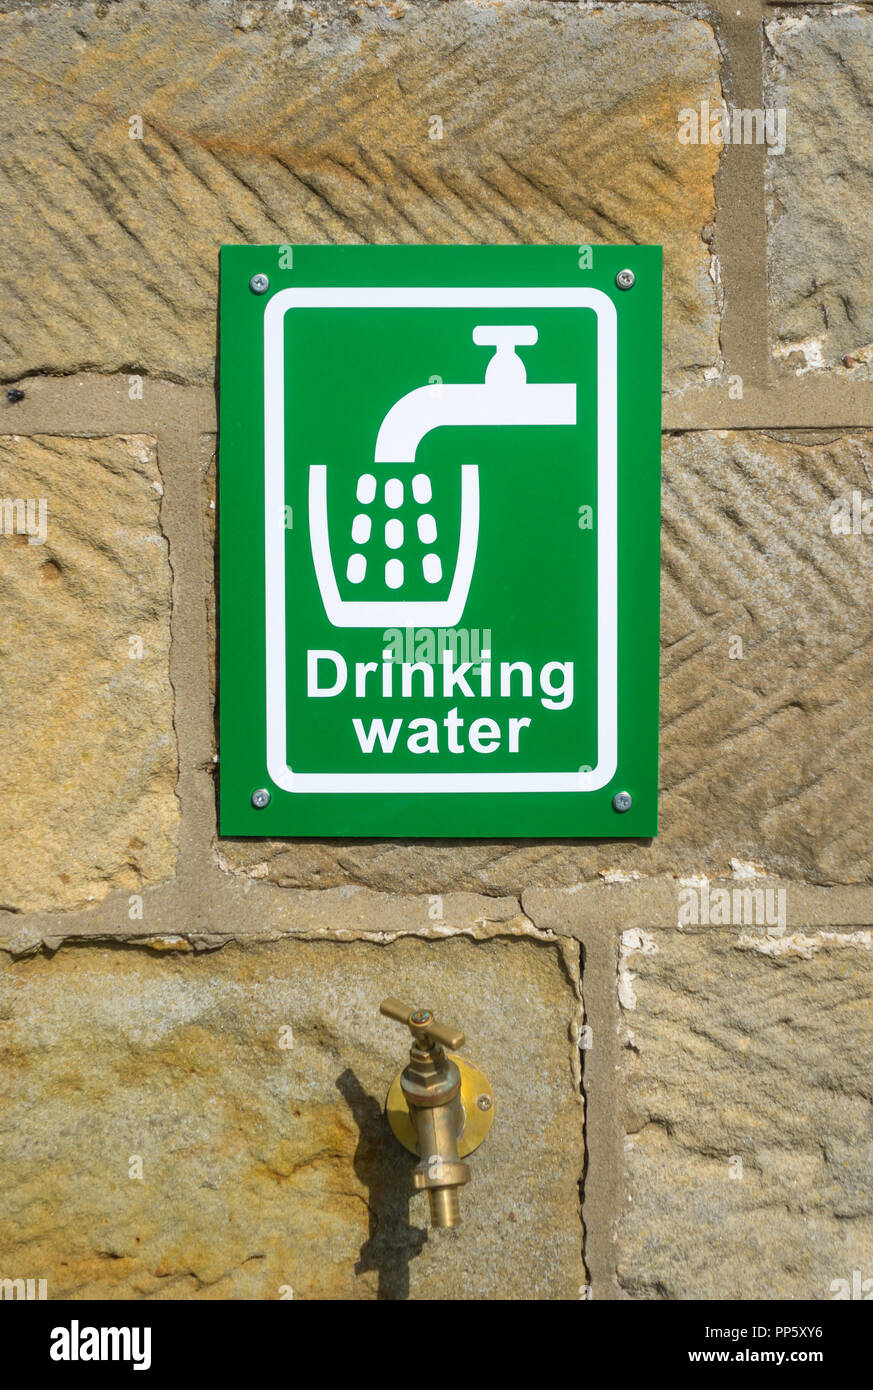 A green and white outdoor drinking water sign on a sandstone wall above a brass tap Stock Photo